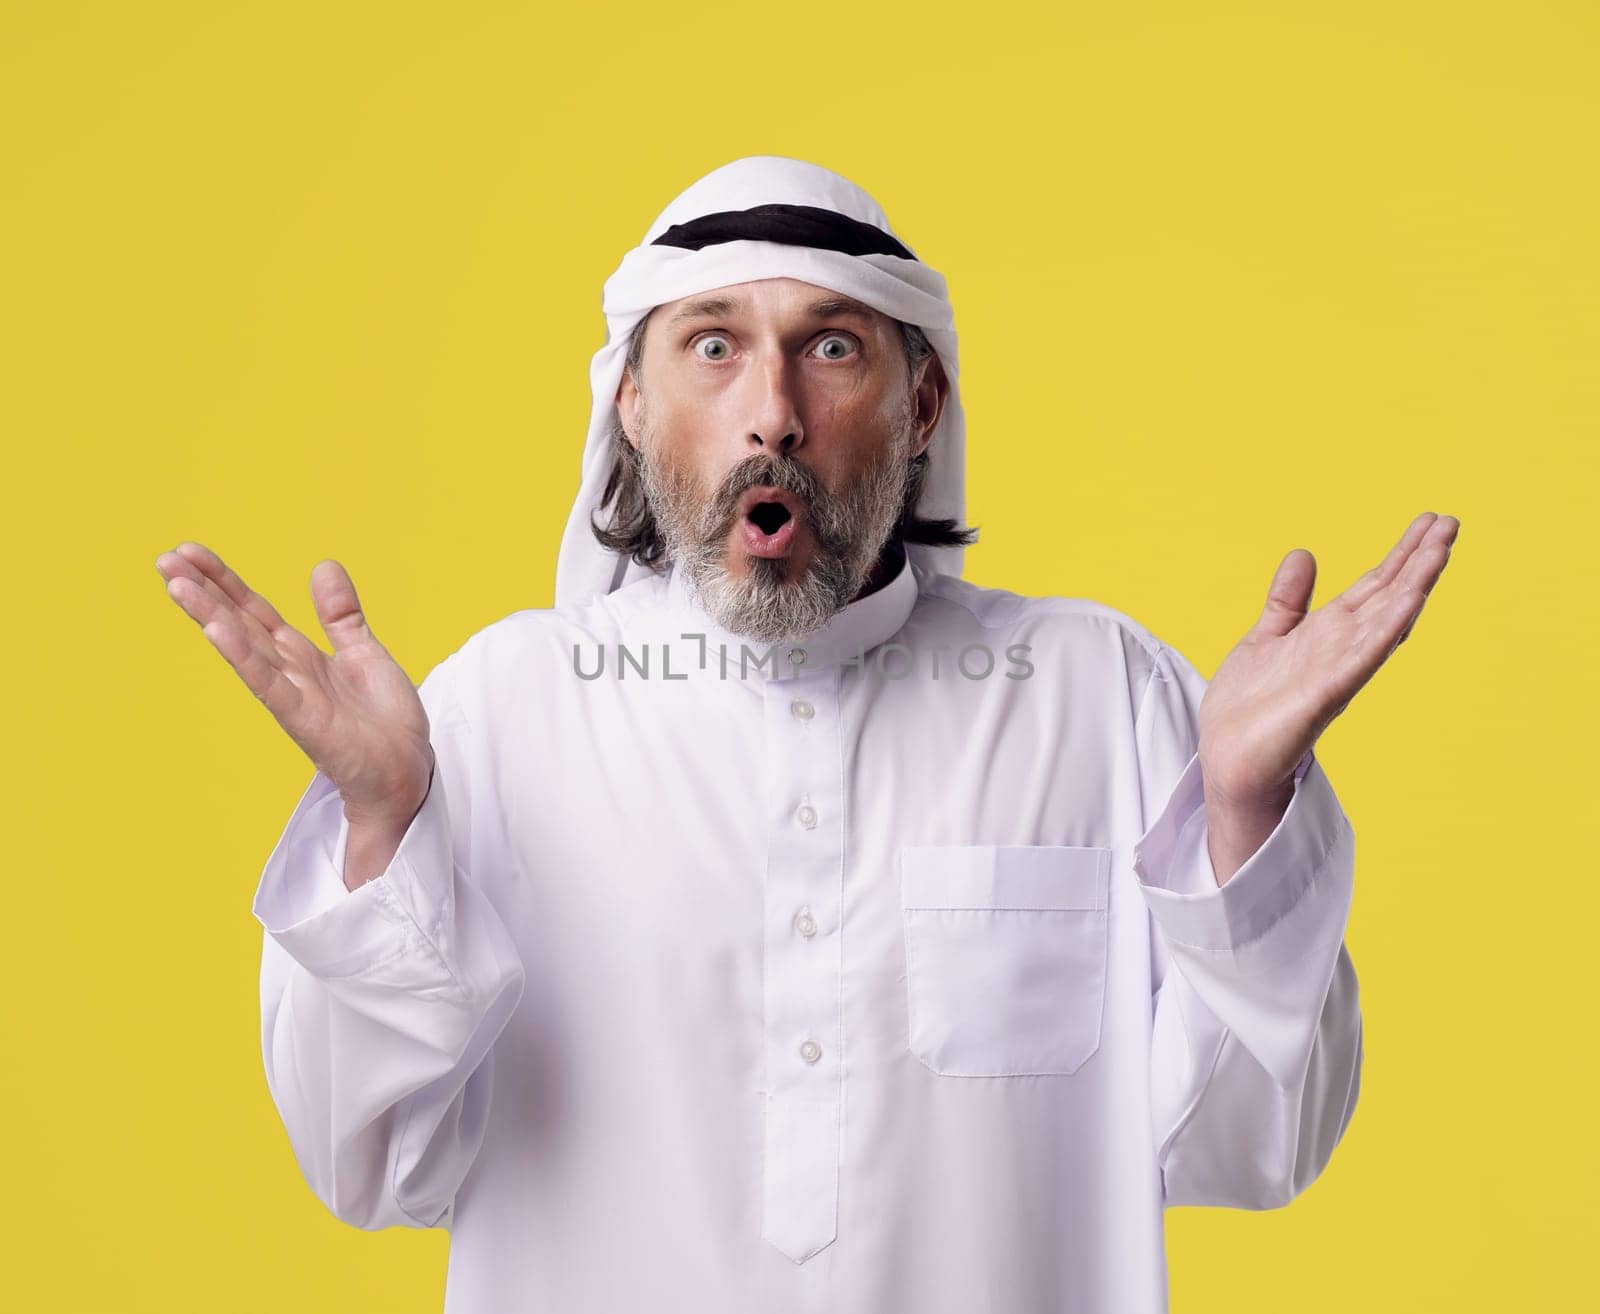 Surprised Arab man in traditional Dishdasha clothing raises both hands in the air, isolated on a bright yellow background with copy space. High quality photo